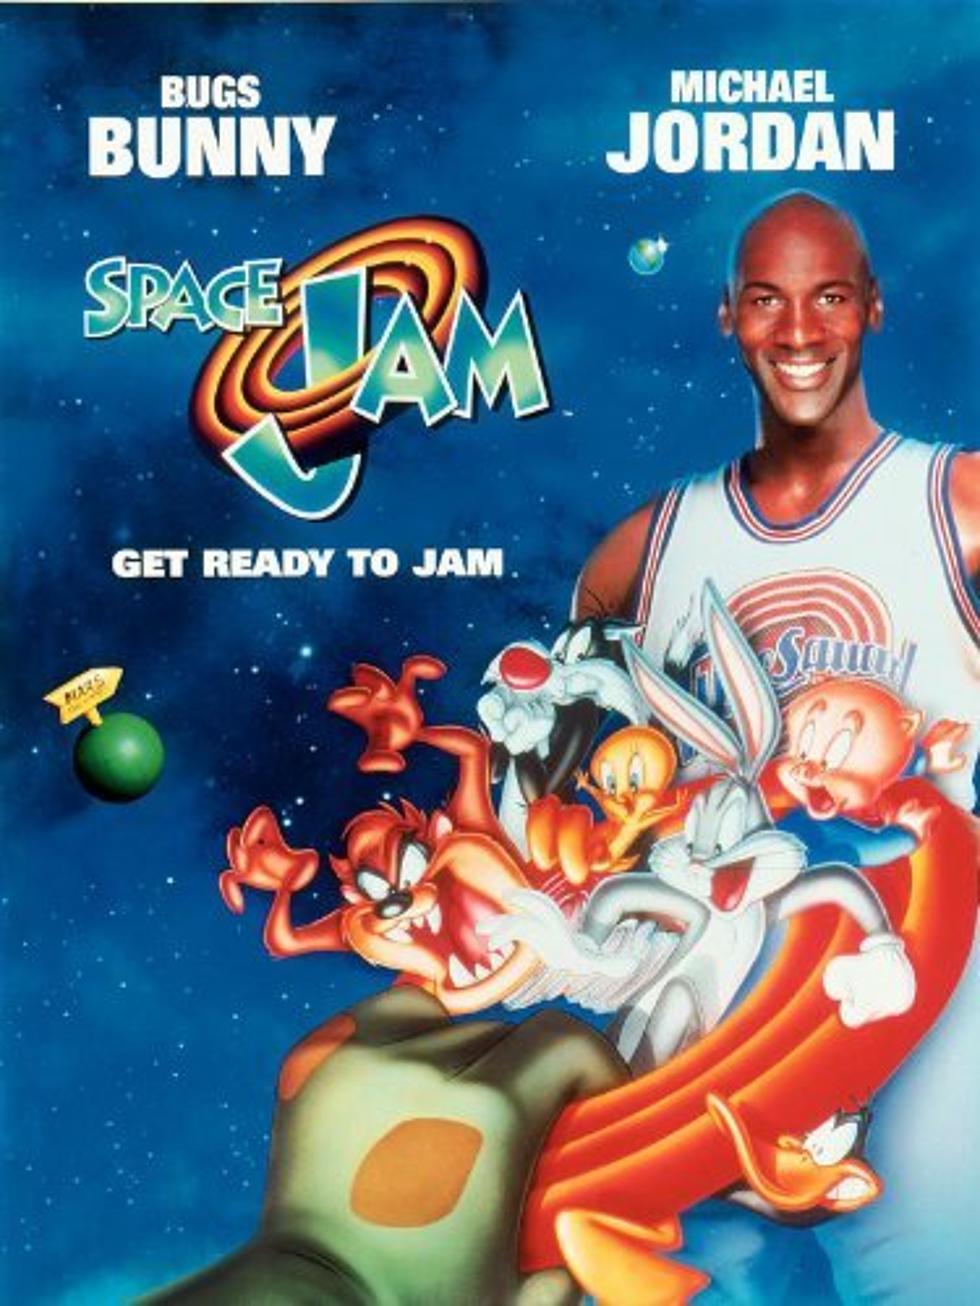 This Friday Night’s Free Downtown Movie Is “Space Jam”